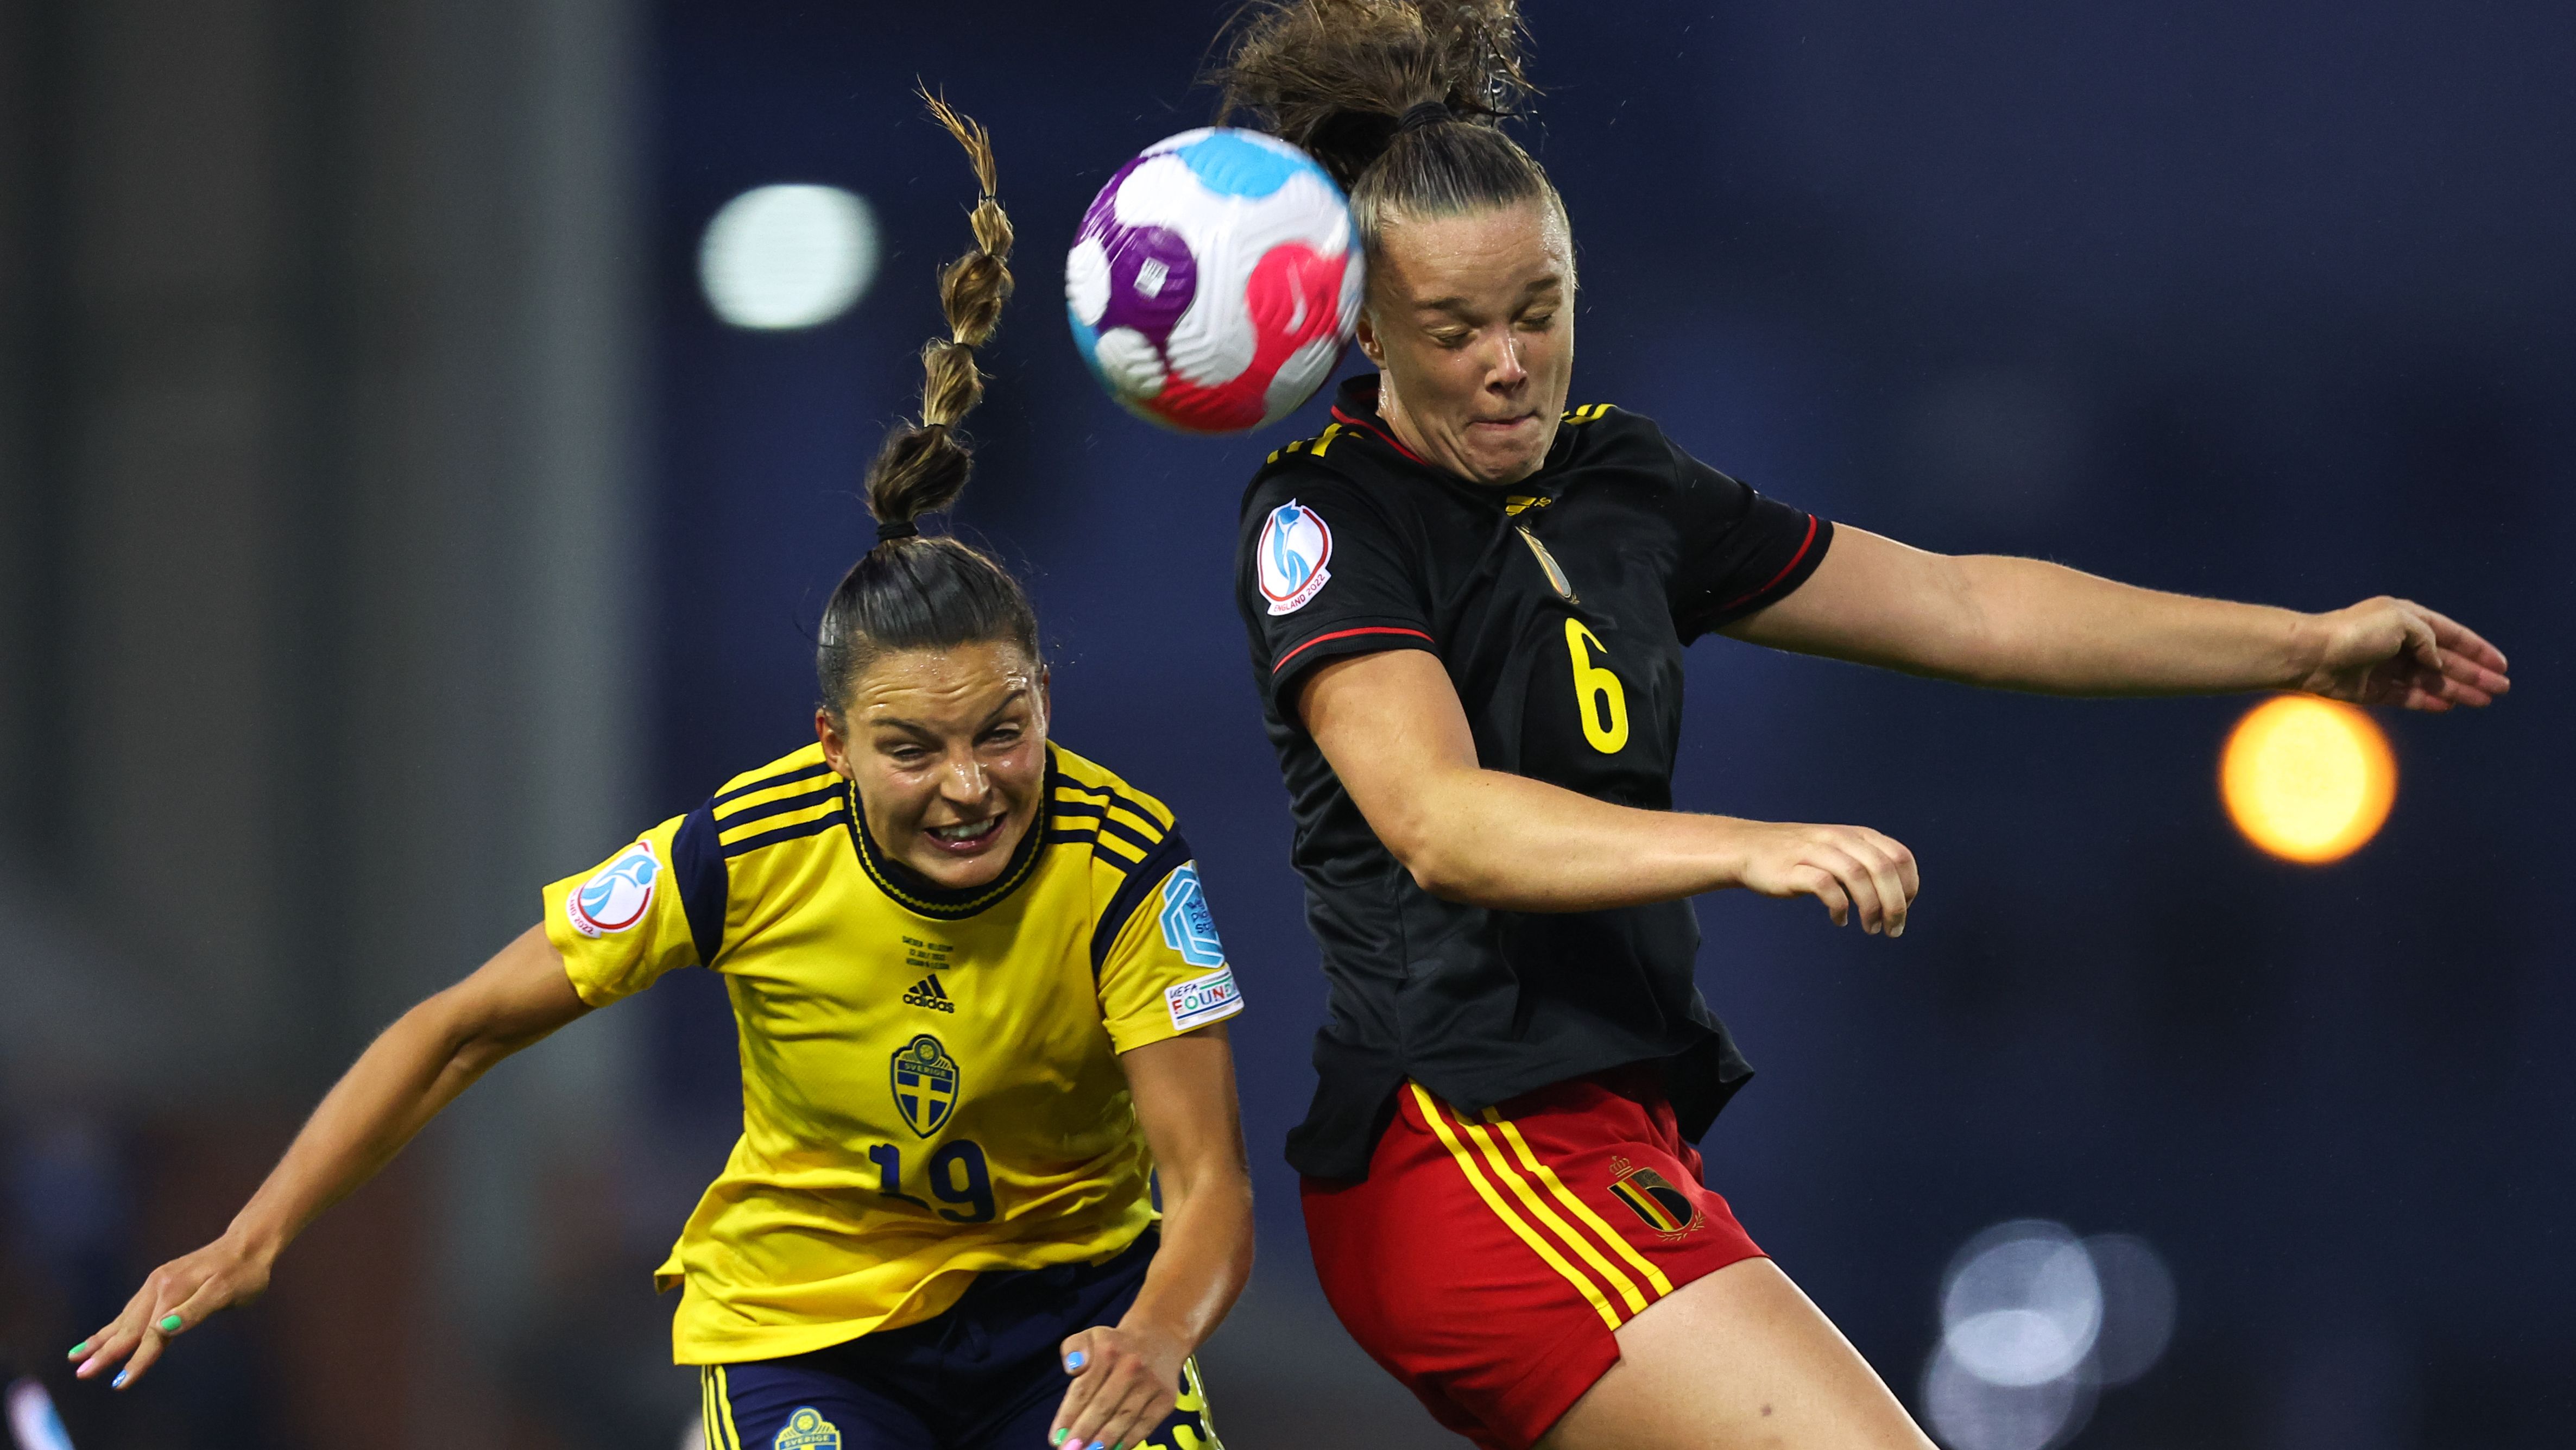 Sweden's Johanna Rytting Kaneryd (left) challenges for a header with Tine De Caigny of Belgium (right).